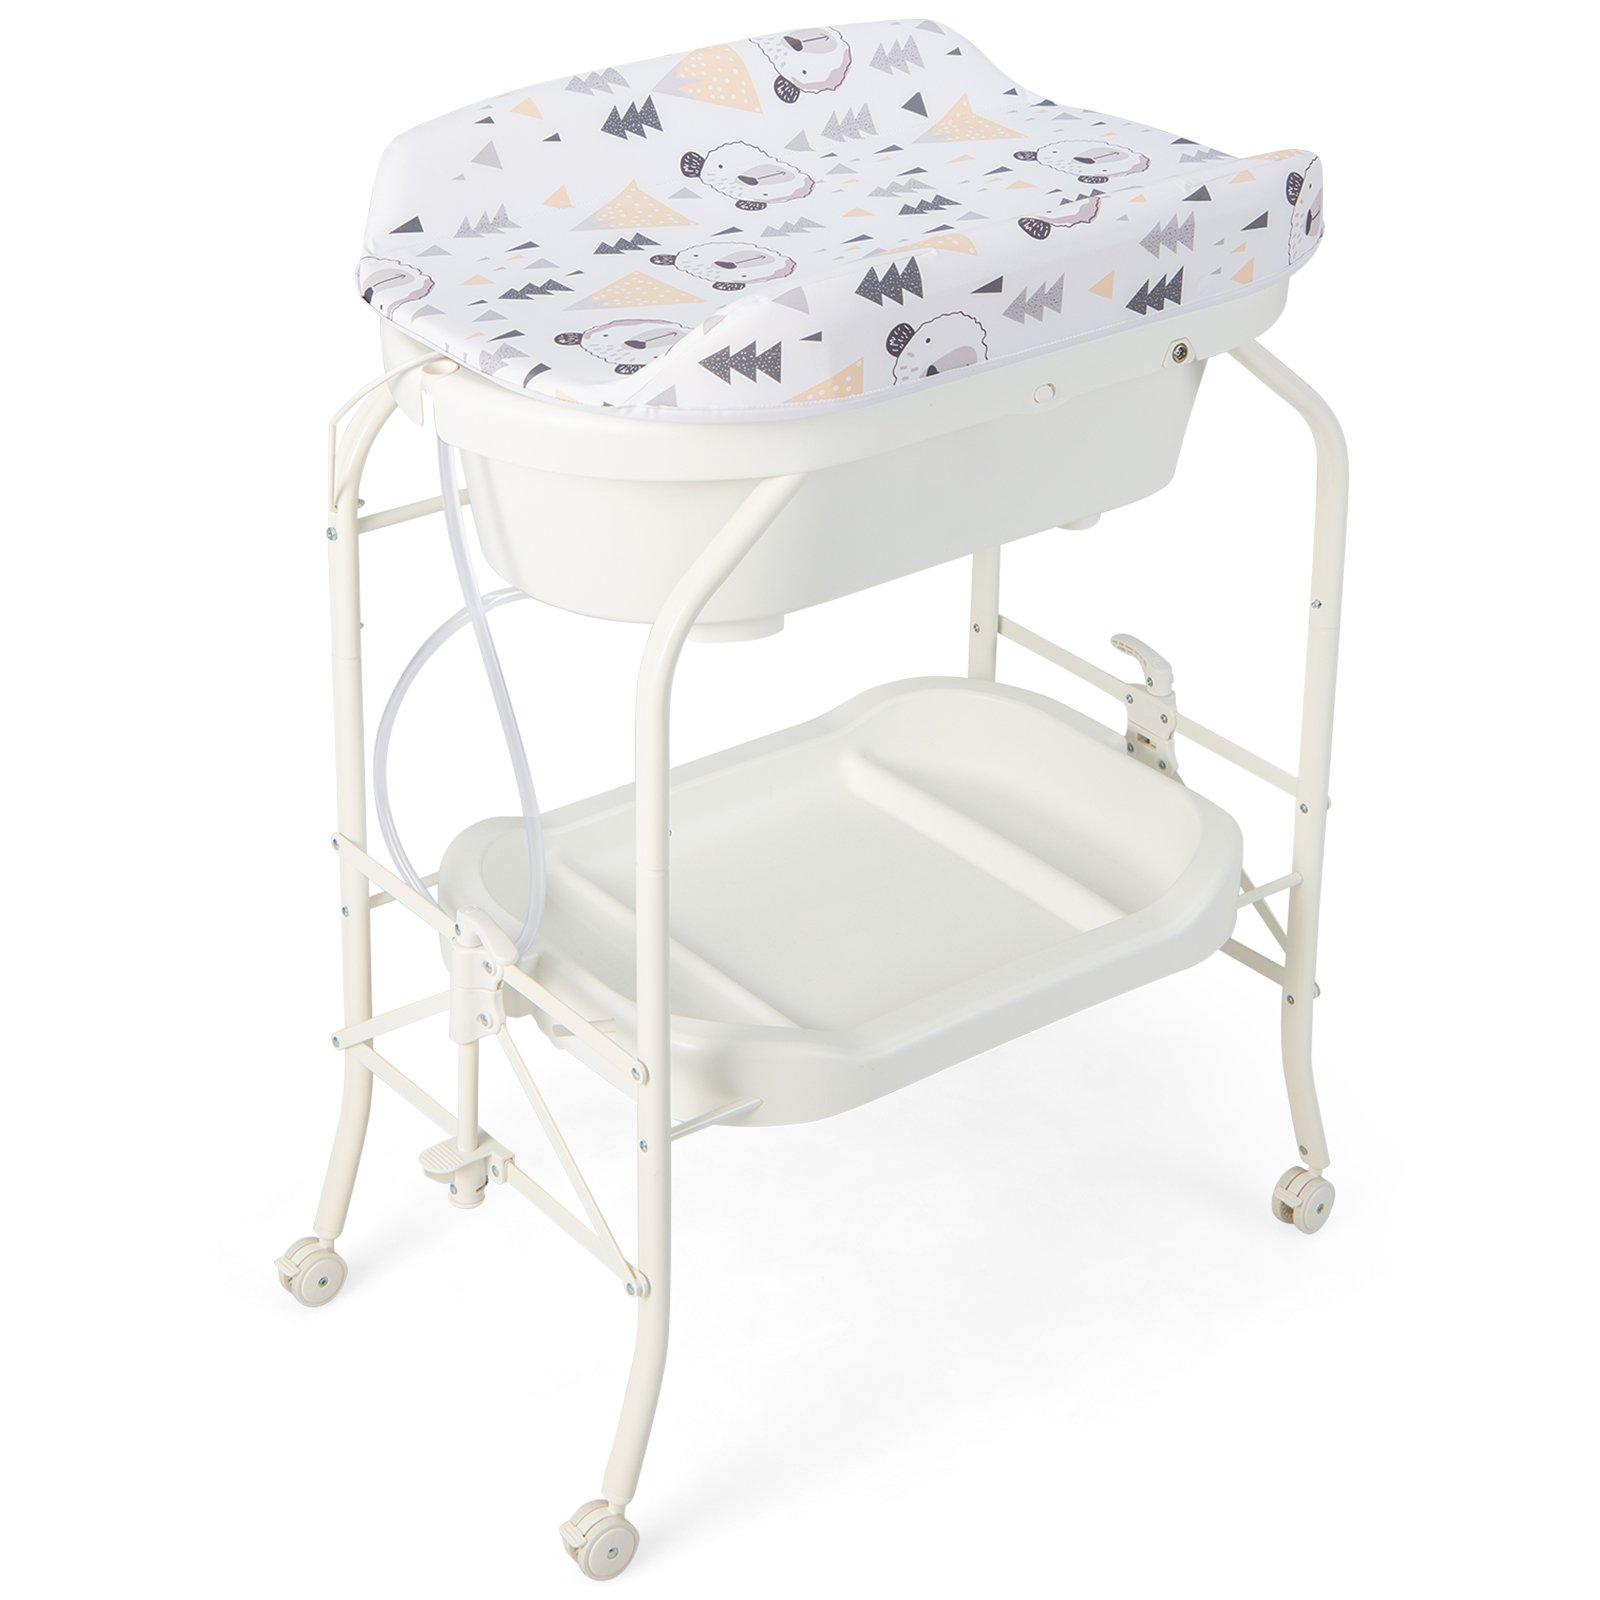 Baby Changing Table with Bathtub Folding Infant Diaper Changing Nursery Station